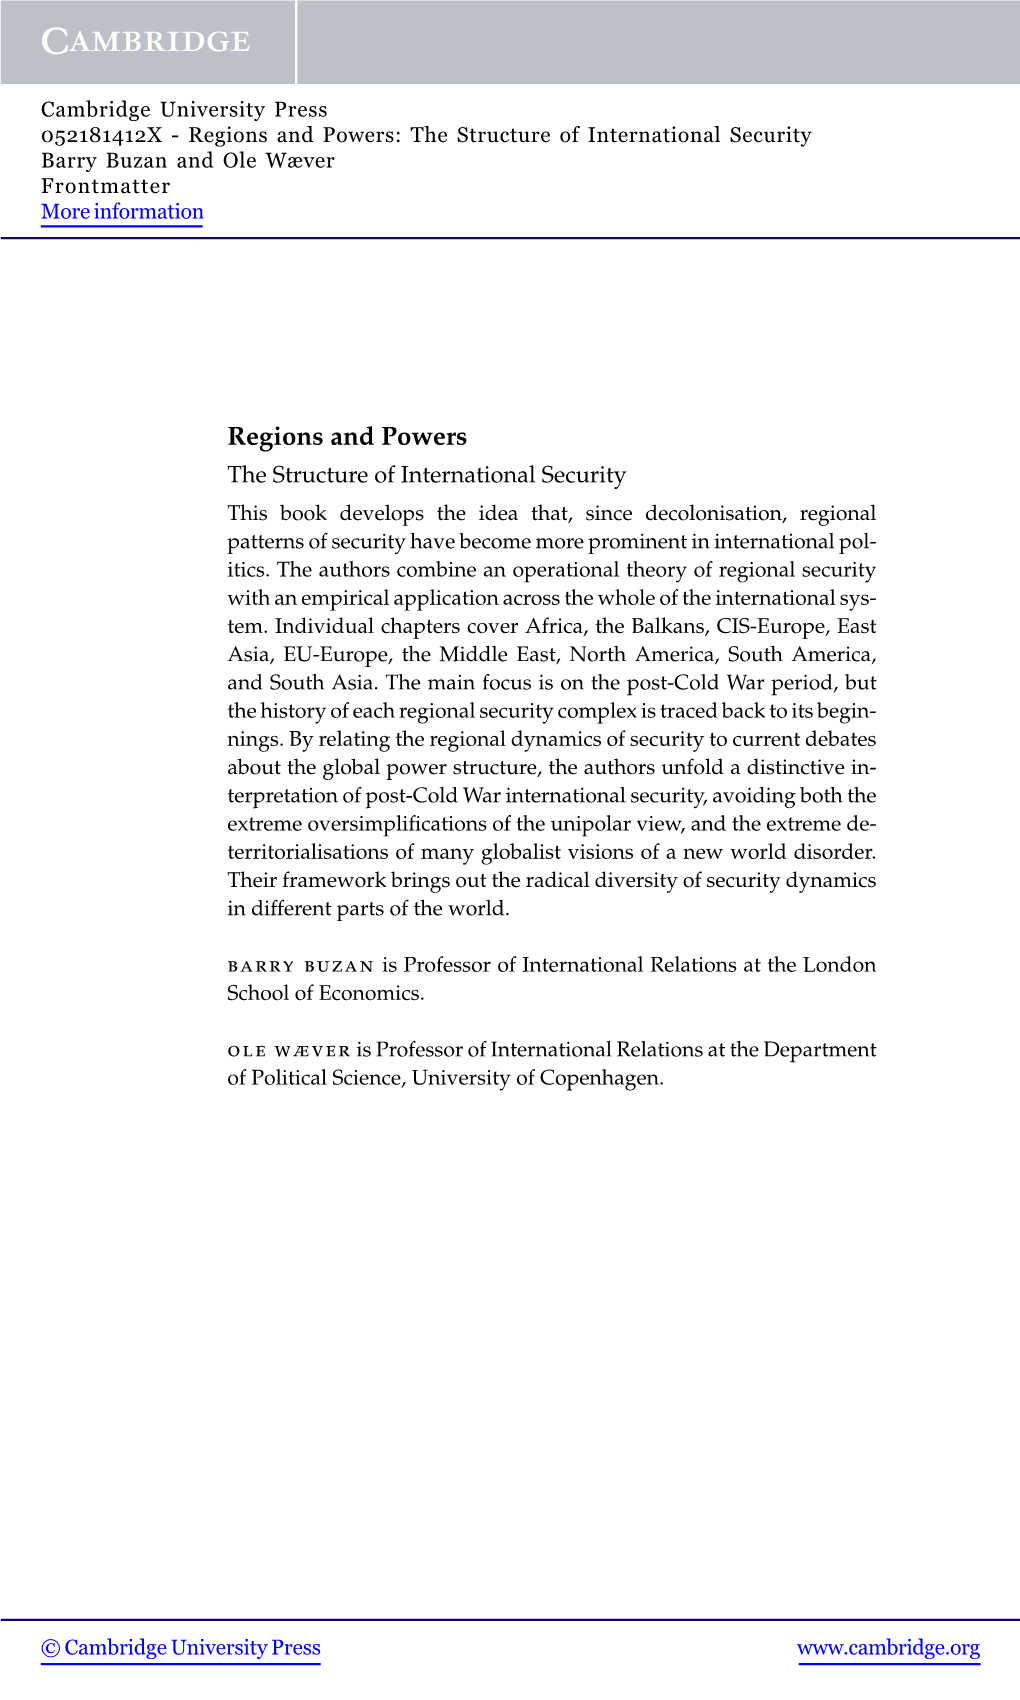 Regions and Powers: the Structure of International Security Barry Buzan and Ole Wæver Frontmatter More Information